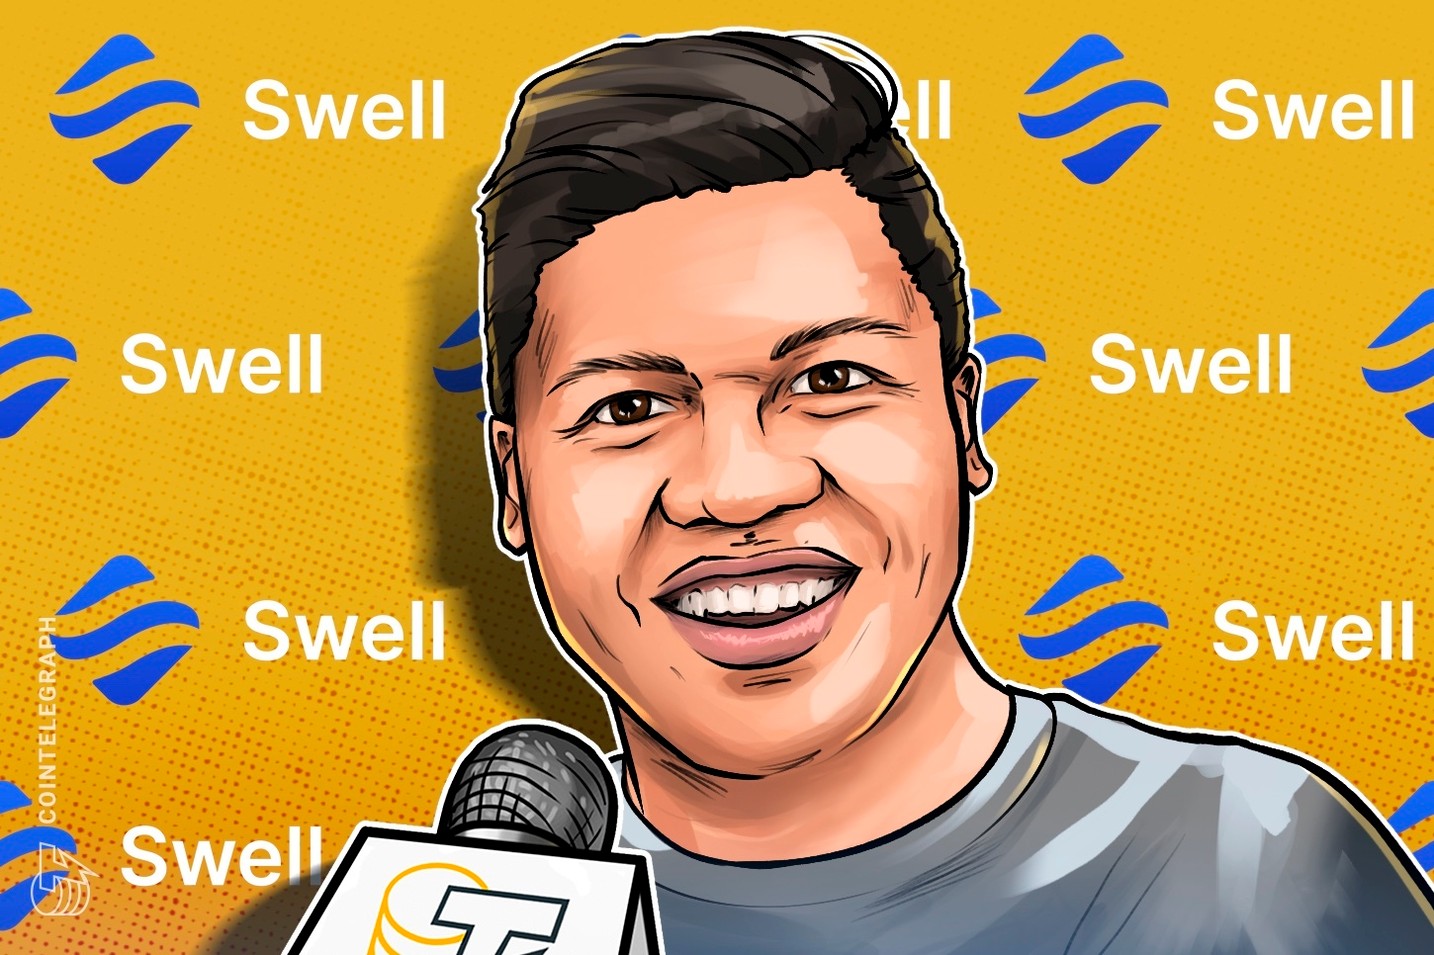 Addressing centralization concerns in liquid staking — Q&A with Swell